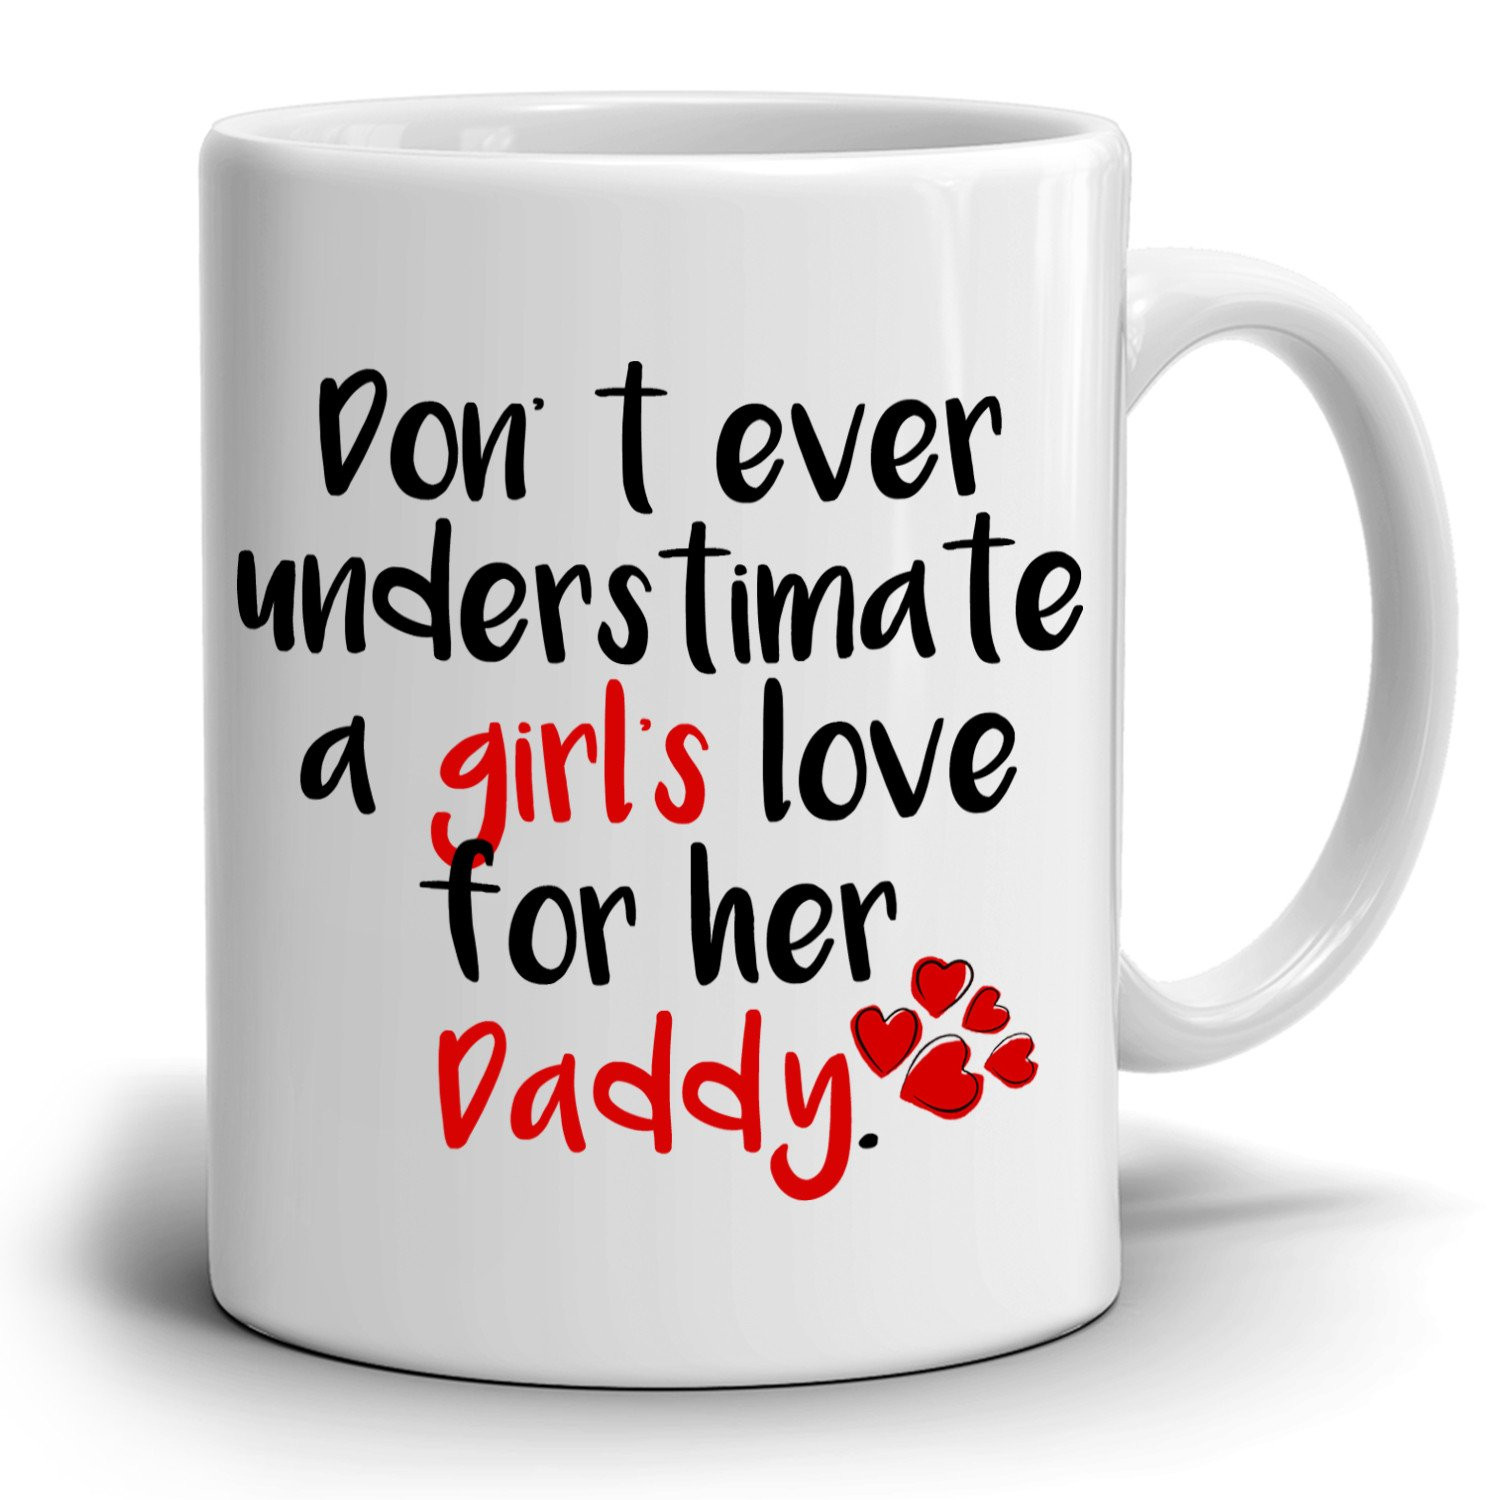 Daddy Daughter Fathers Day Gifts
 Fathers Day Gifts From Daughter to Daddy Dad and Papa